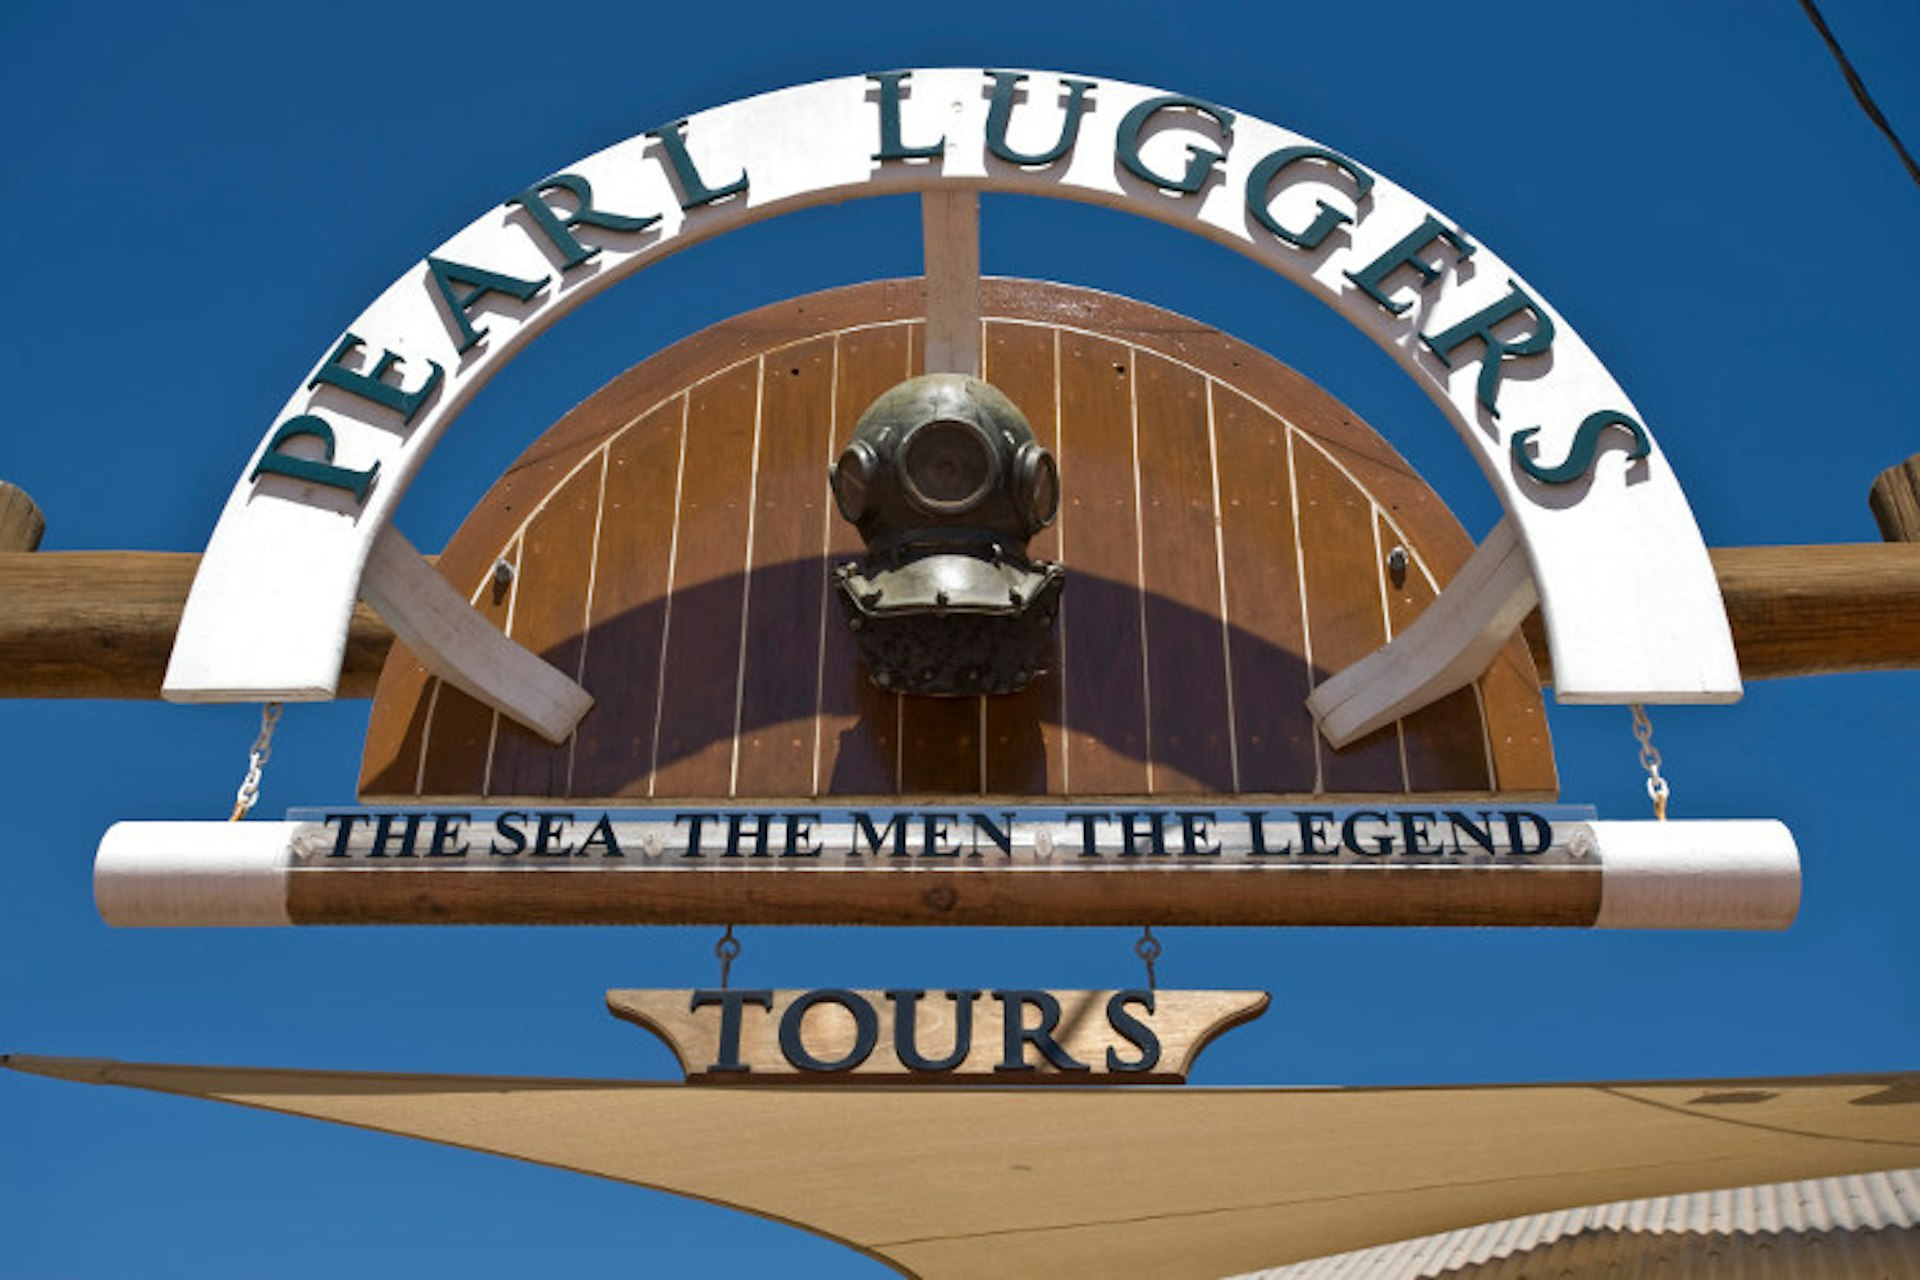 Sign outside the Pearl Luggers Museum in Broome. Image by John Hay / Lonely Planet Images / Getty Images